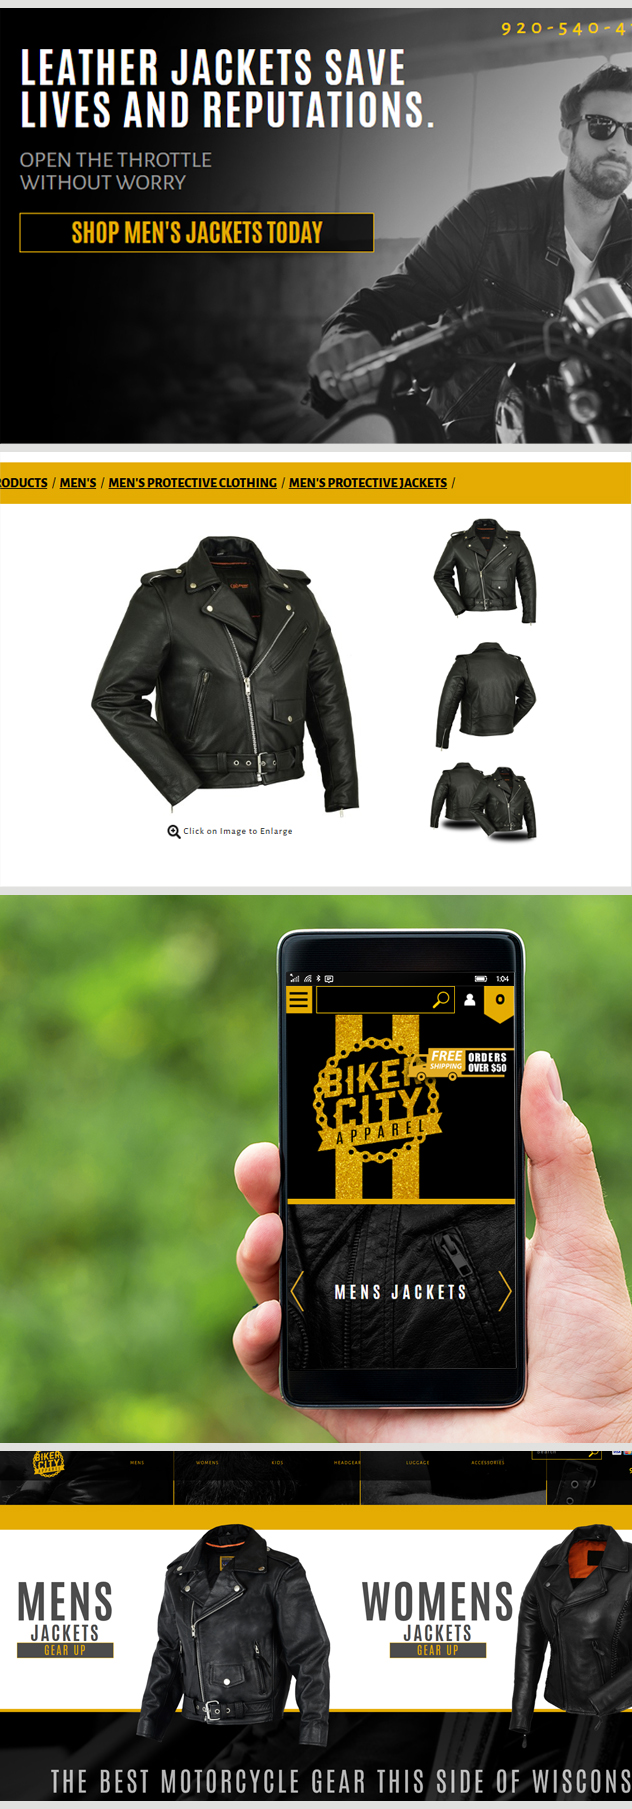 Milwaukee web marketing for Motorcycle Apperal and Gear